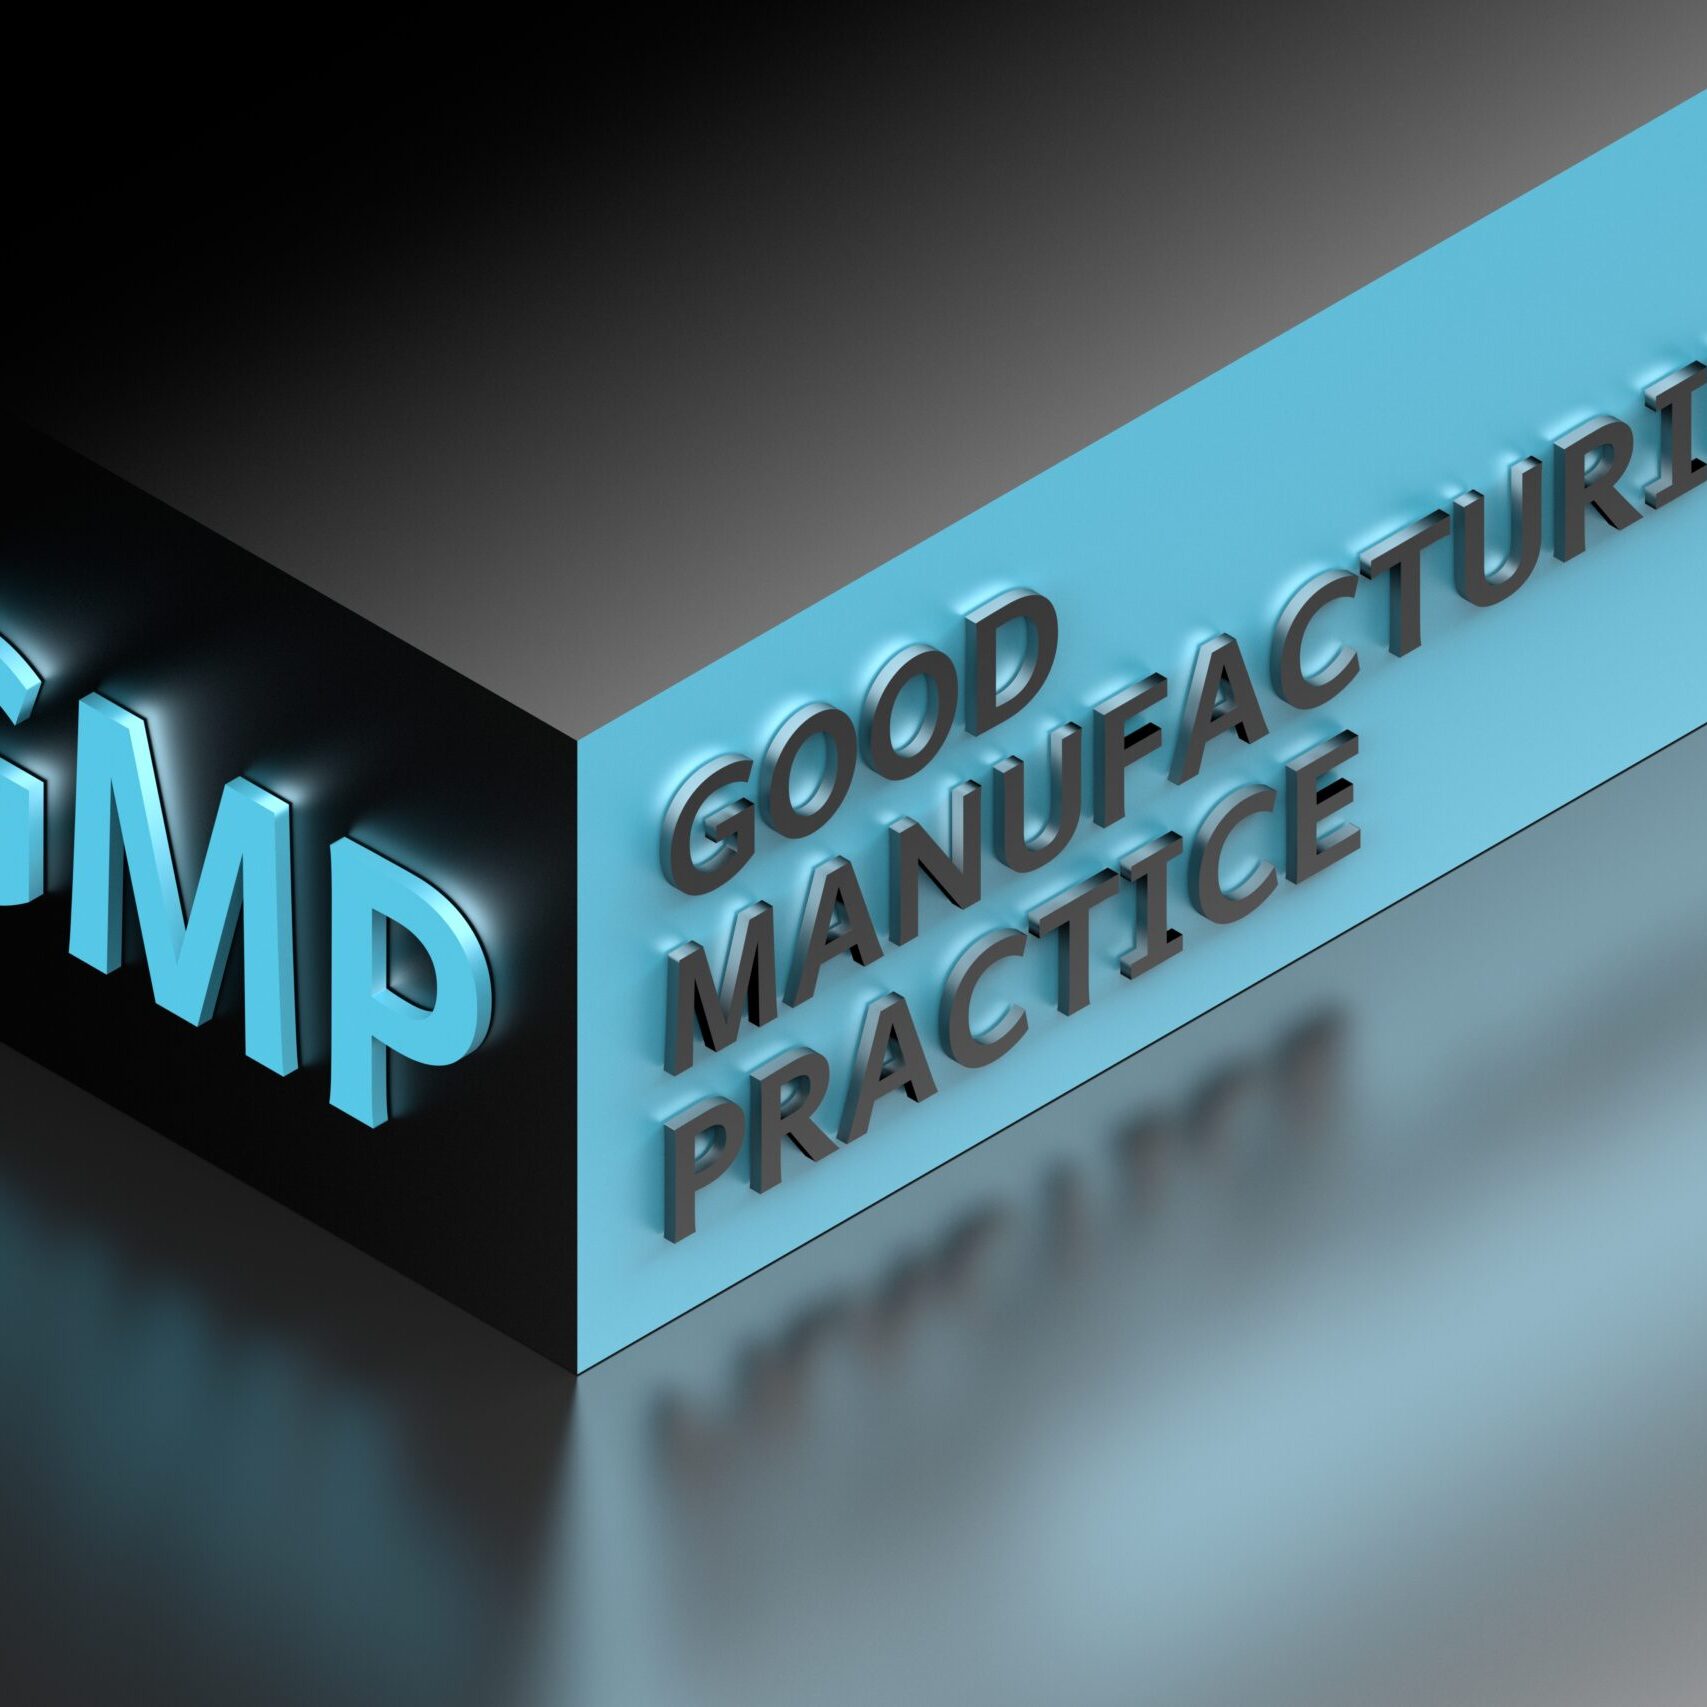 GMP abbreviation standing for good manufacturing practice written in dark metallic letters on isometric cube shape. 3d illustration.